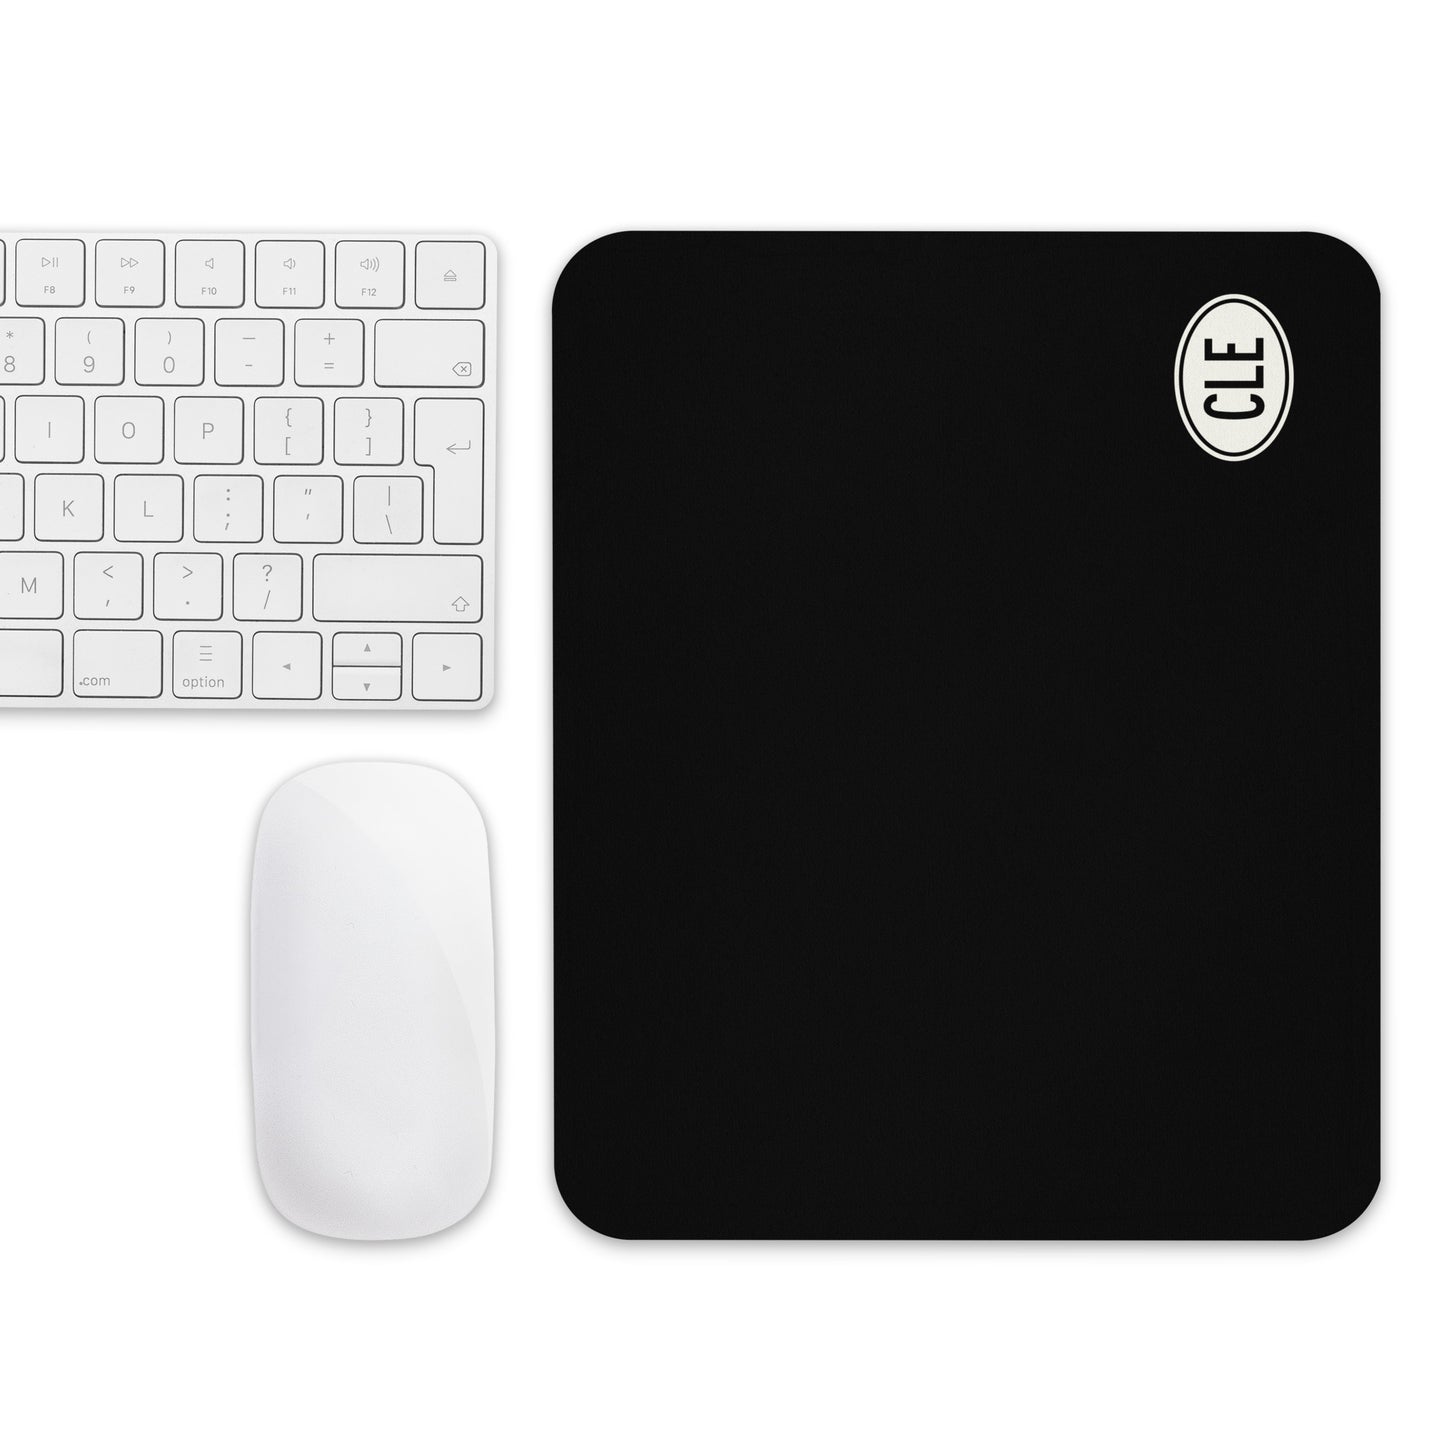 Unique Travel Gift Mouse Pad - White Oval • CLE Cleveland • YHM Designs - Image 04